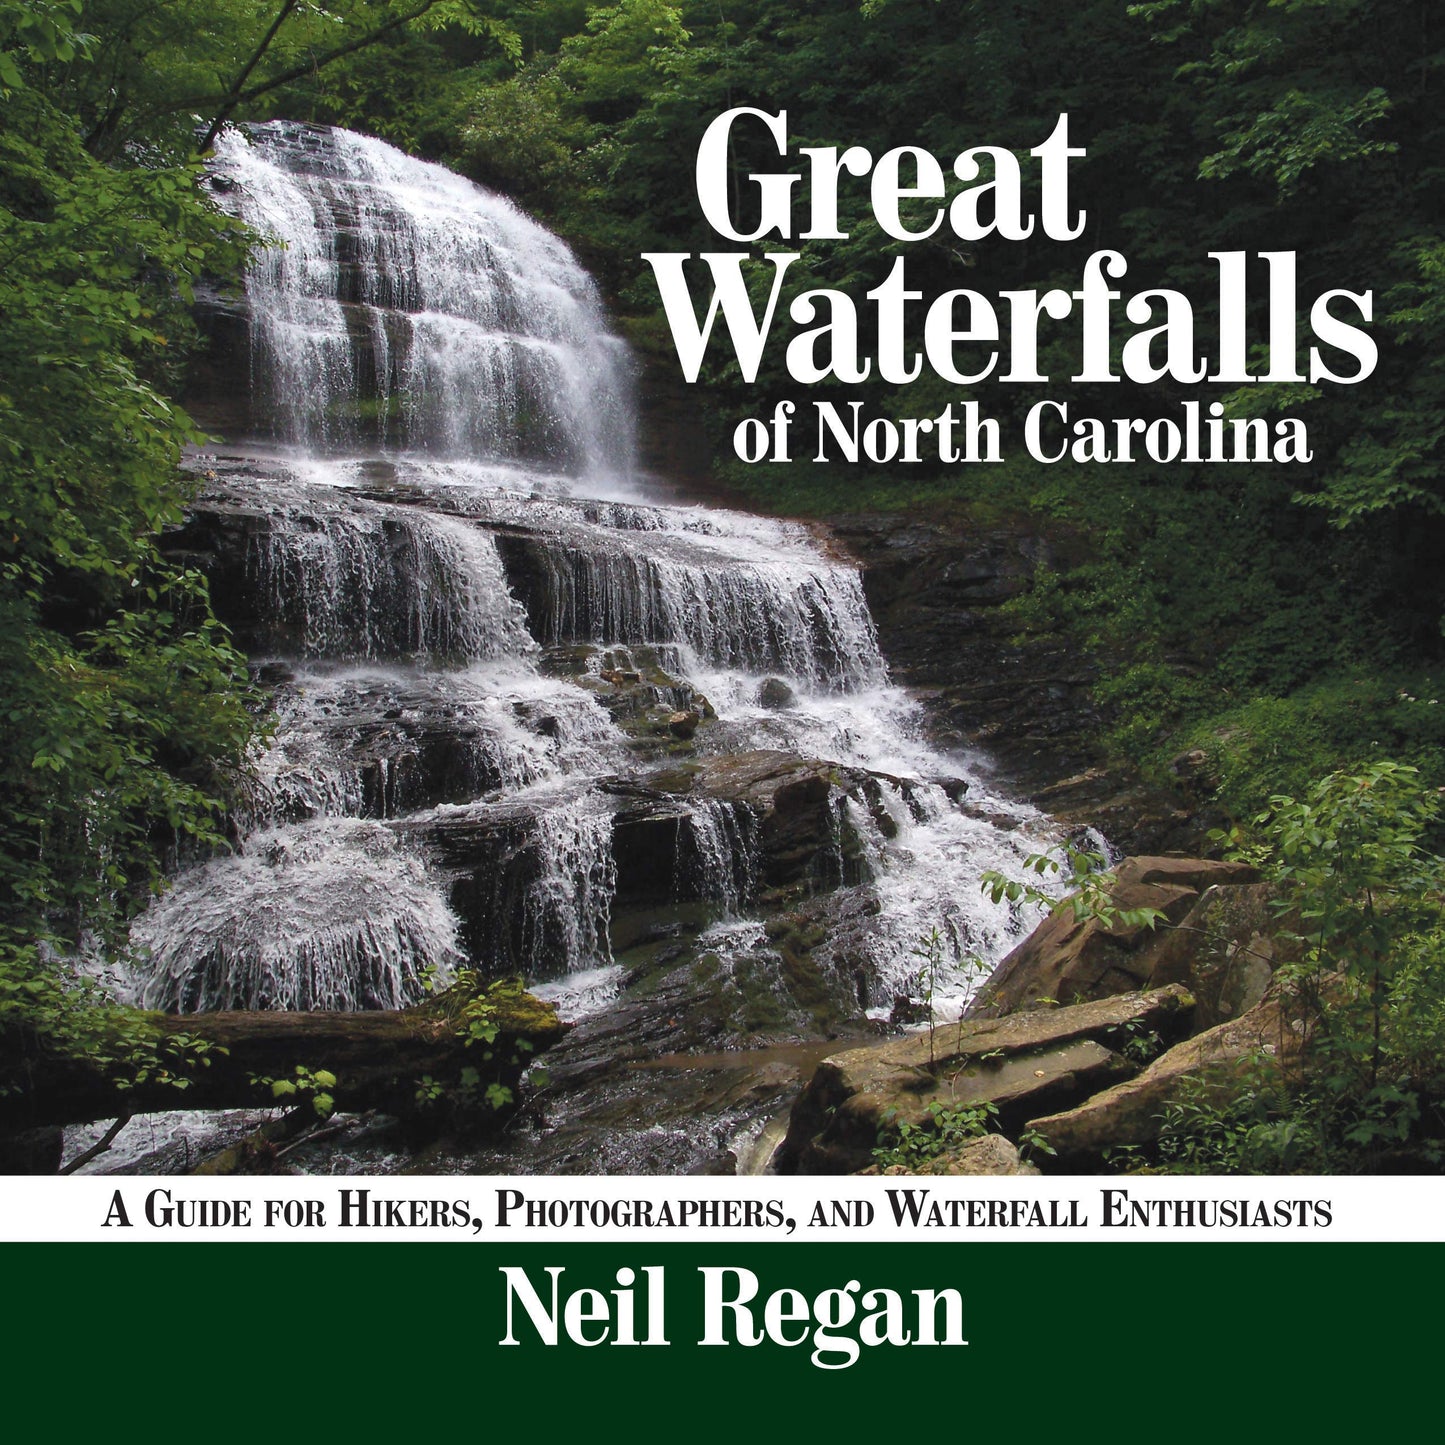 Great Waterfalls of North Carolina: A Guide for Hikers, Photographers, and Waterfall Enthusiasts